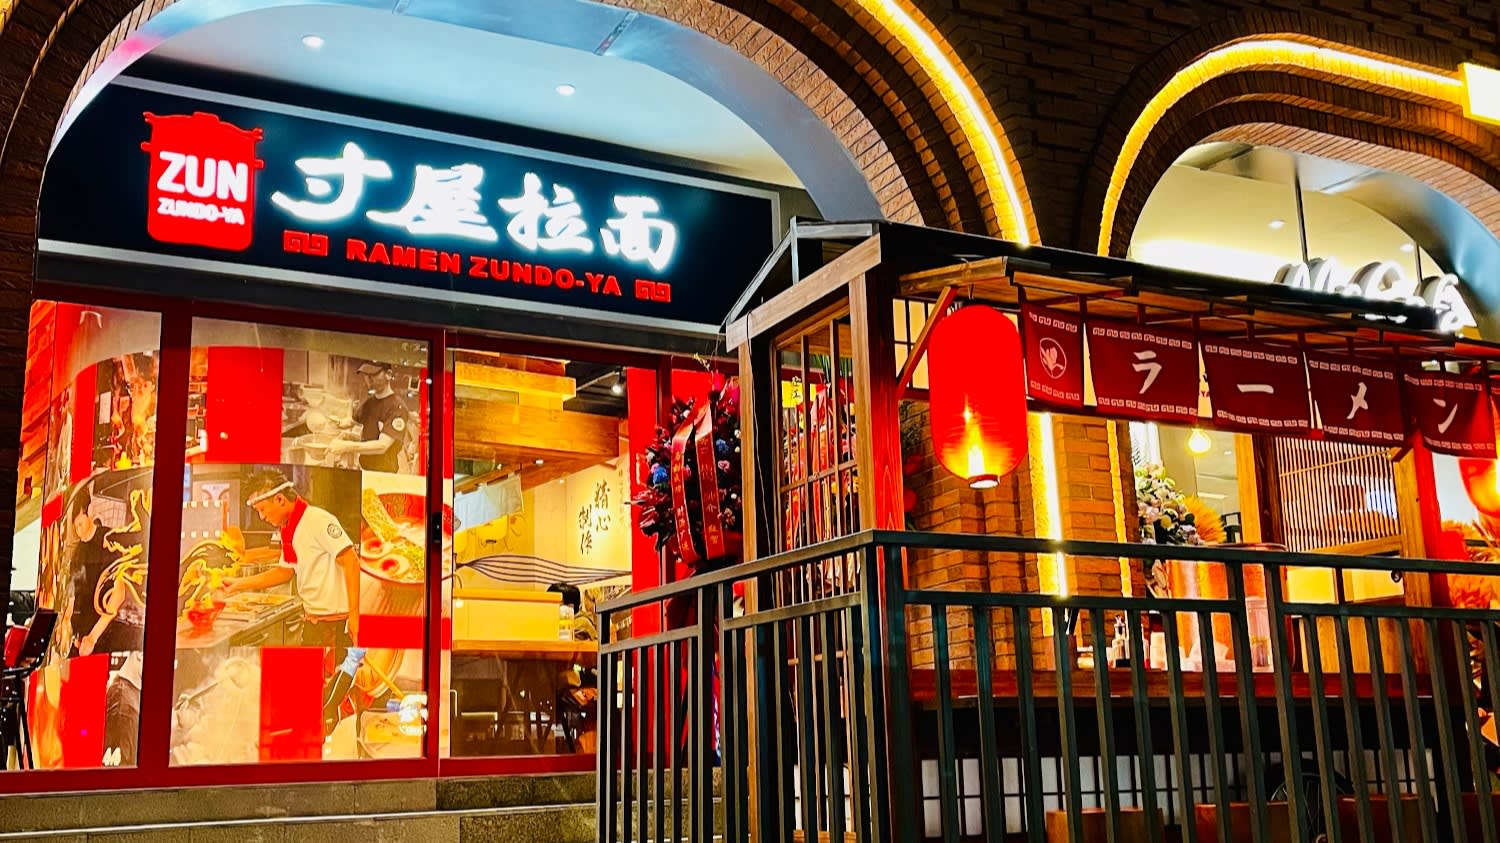 Japanese Restaurant Chains Eye Overseas Expansion Amid Domestic Challenges